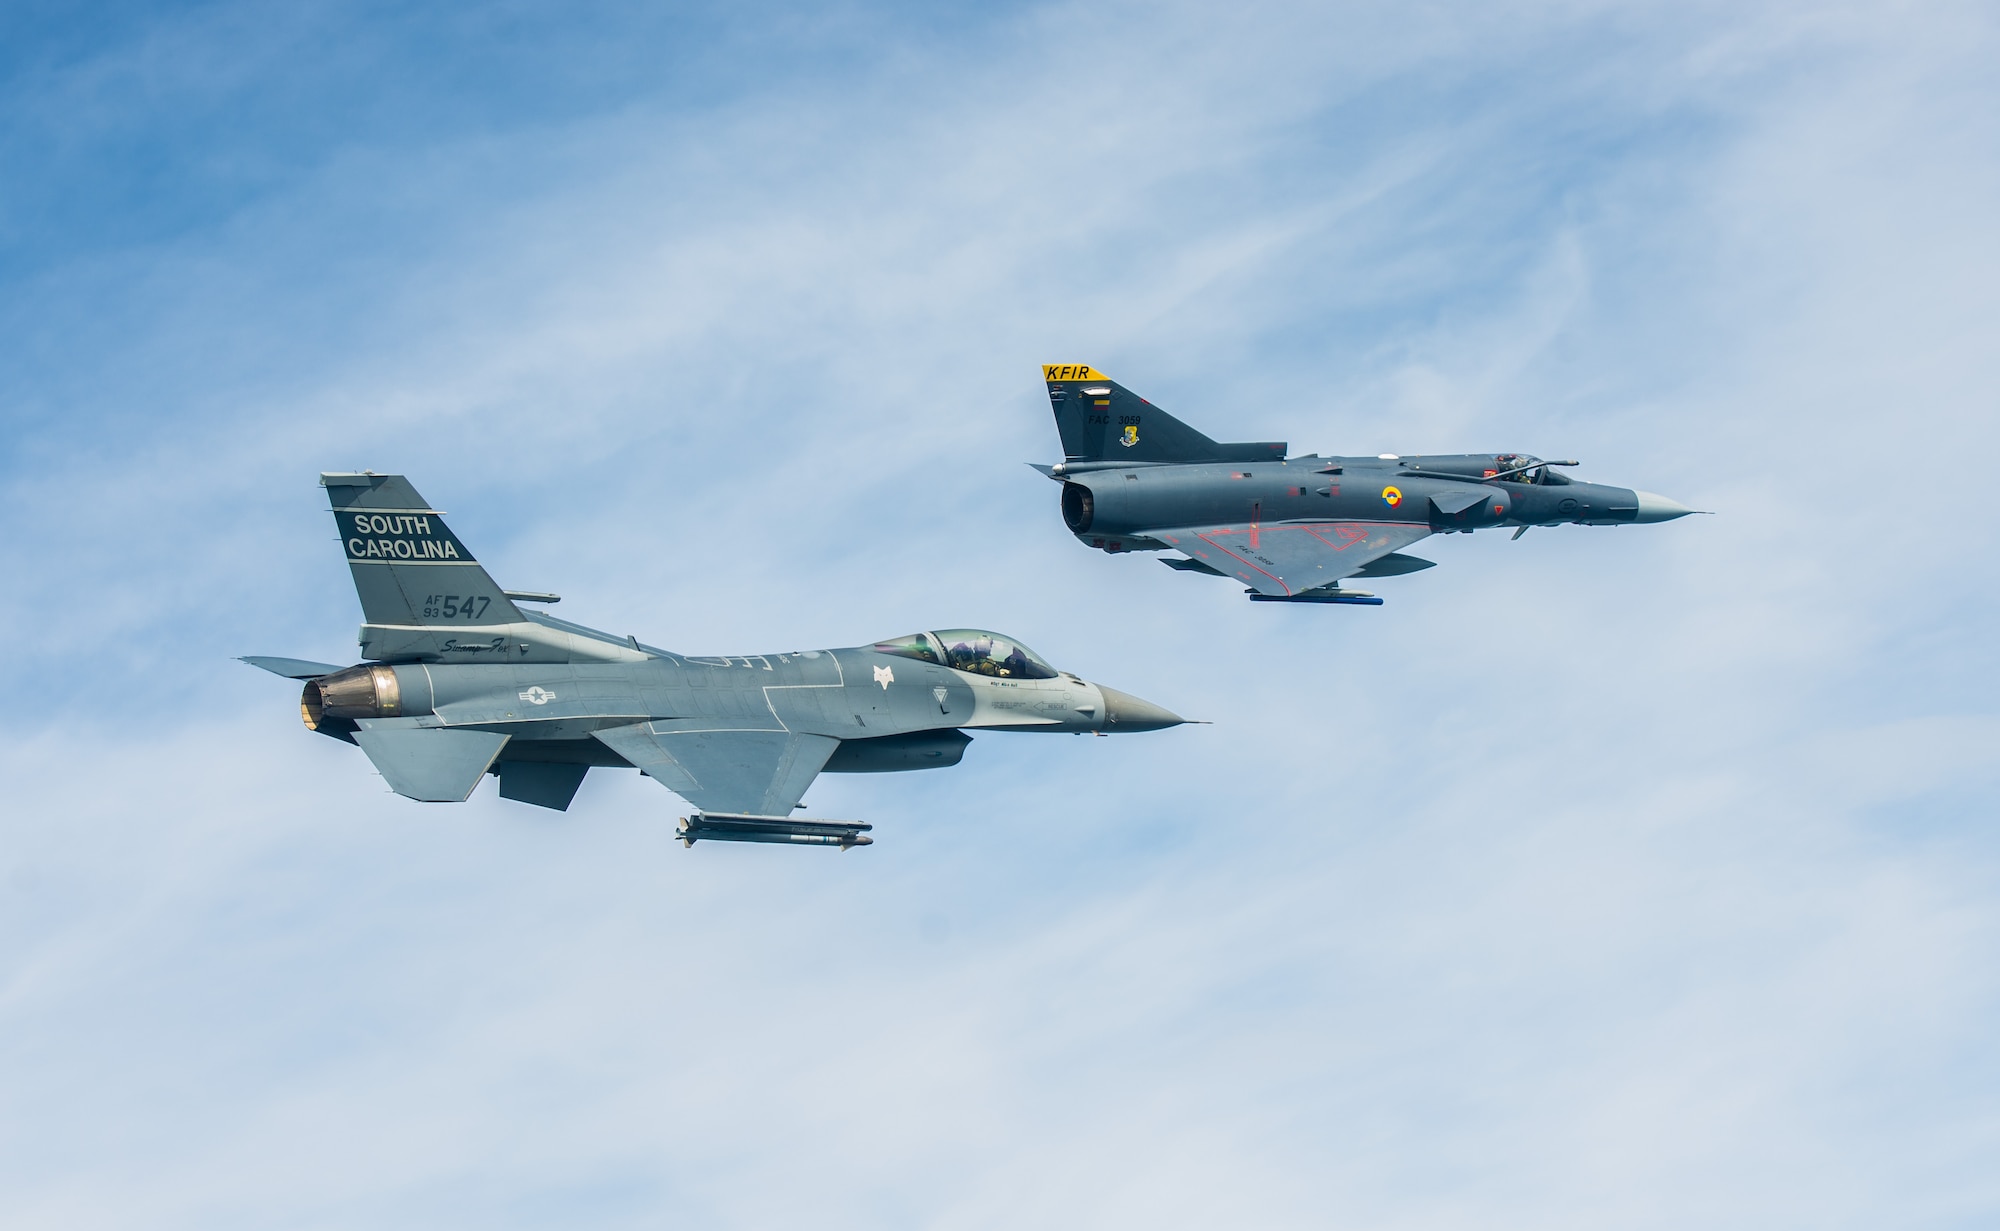 A South Carolina Air National Guard F-16 flies alongside a Colombian air force Kfir during a training flight Aug. 12 over Colombia. Nearly 100 Airmen and six F-16s from the 169th Fighter Wing at McEntire Air National Guard Base are participating in the combined air operation engagement, which is the first major joint-air engagement opportunity under the auspices of the South Carolina's State Partnership Program with Colombia. (U.S. Air Force photo by Maj. Matt Booth/Released)